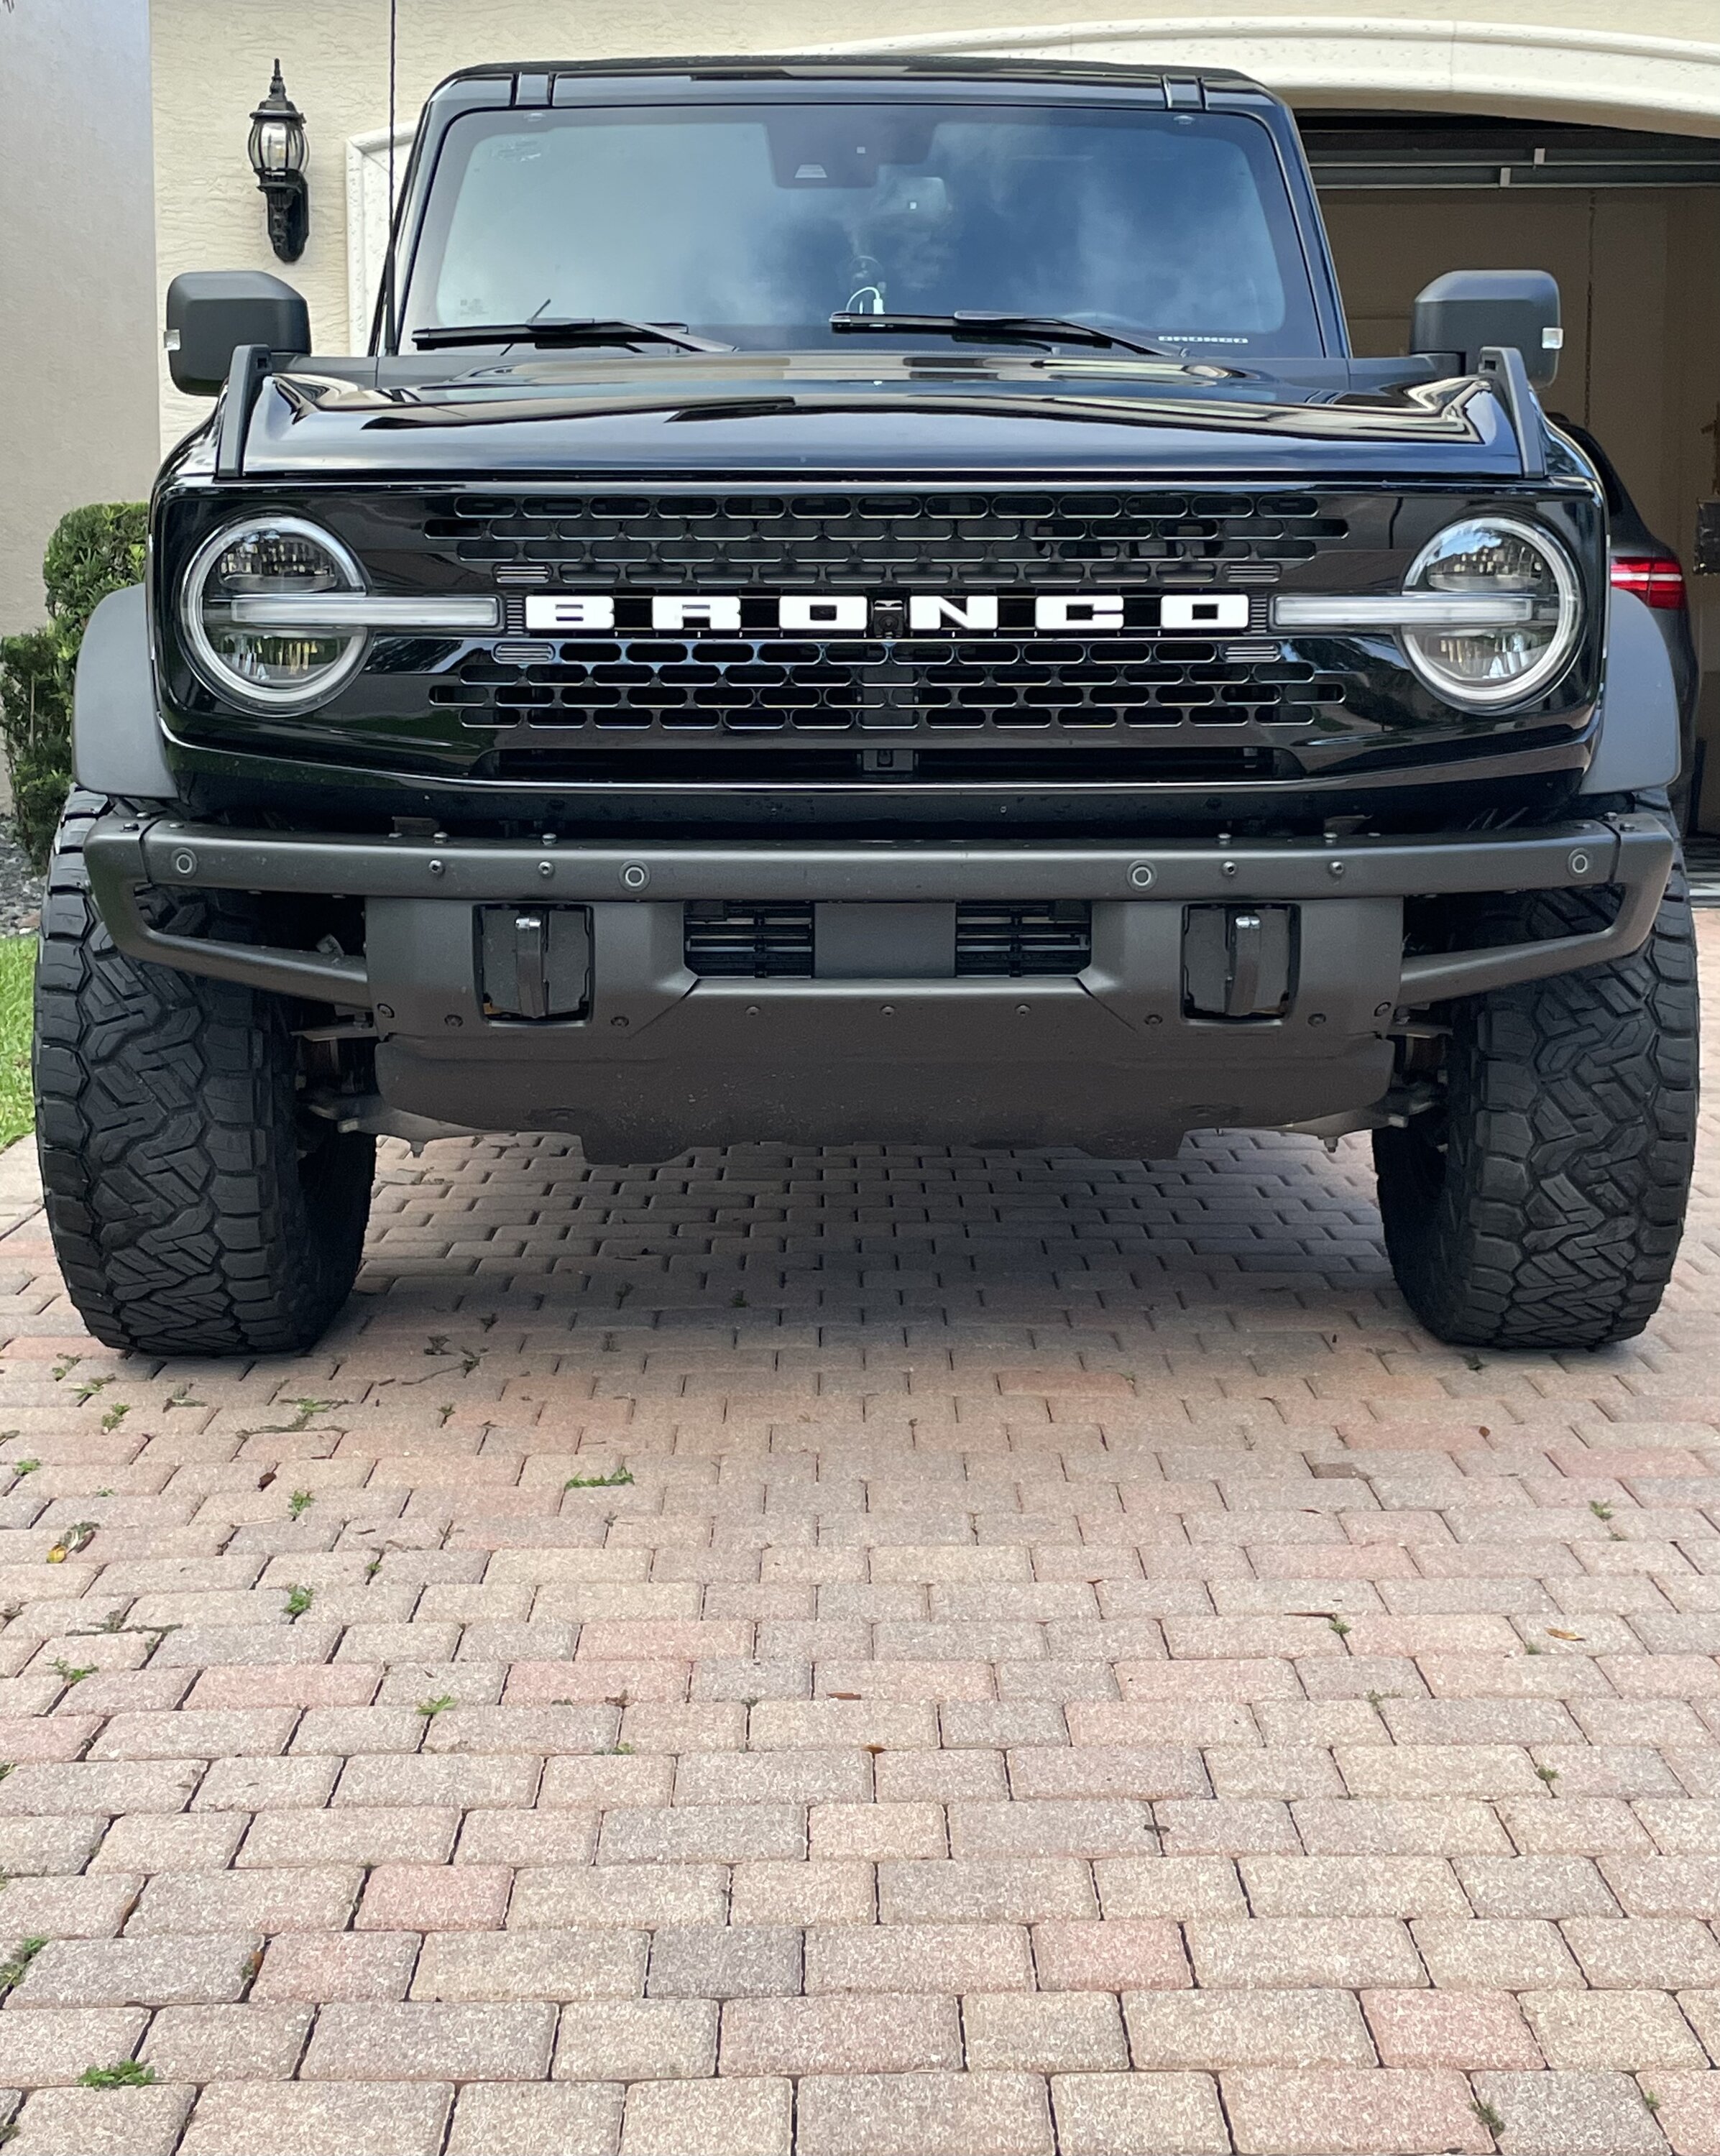 Ford Bronco Show us your installed wheel / tire upgrades here! (Pics) 824C9B23-3BE2-49CC-9853-4A9ADFCEBE6D